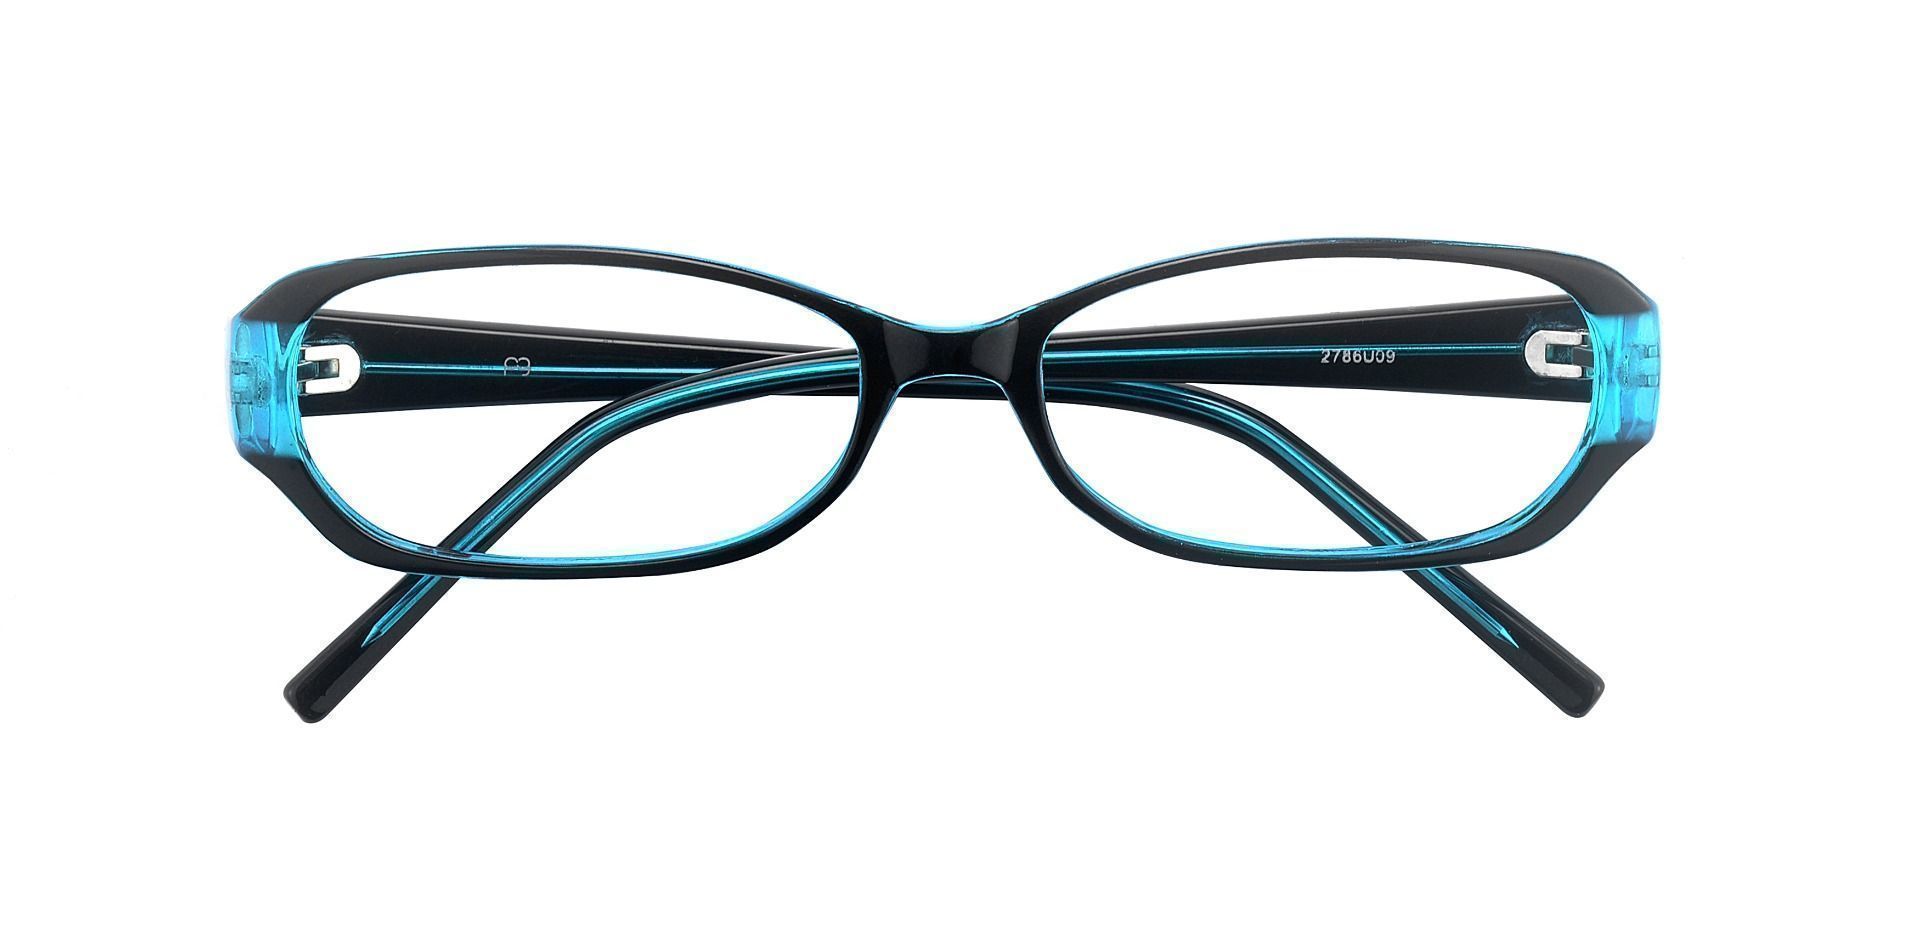 Nairobi Oval Single Vision Glasses - The Frame Is Black And Blue ...